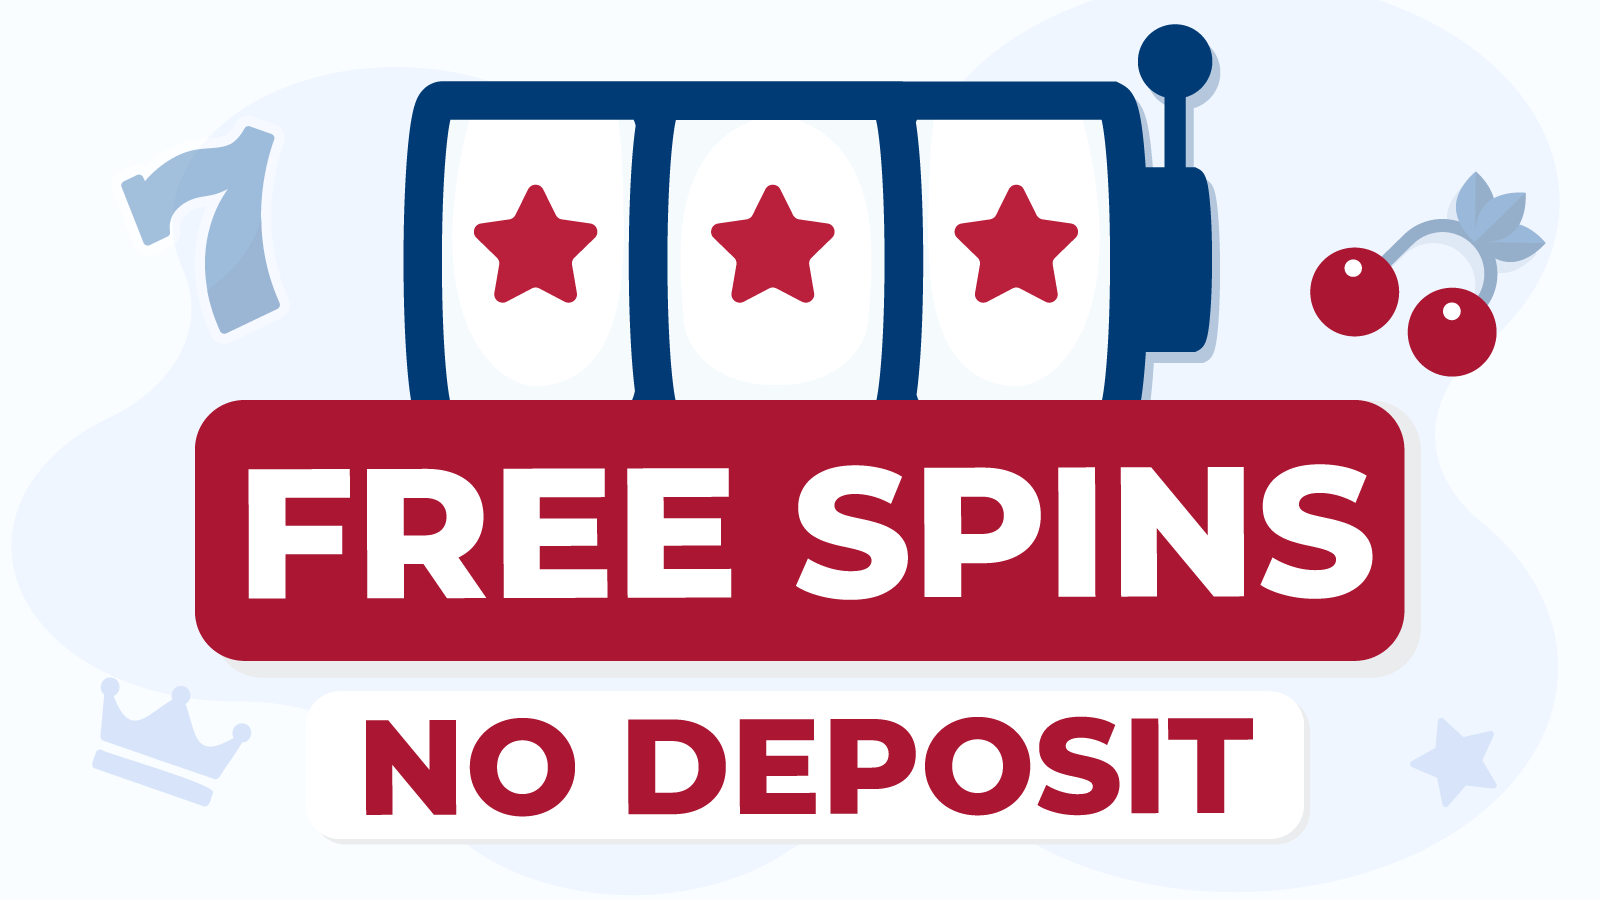 sign up and get free spins